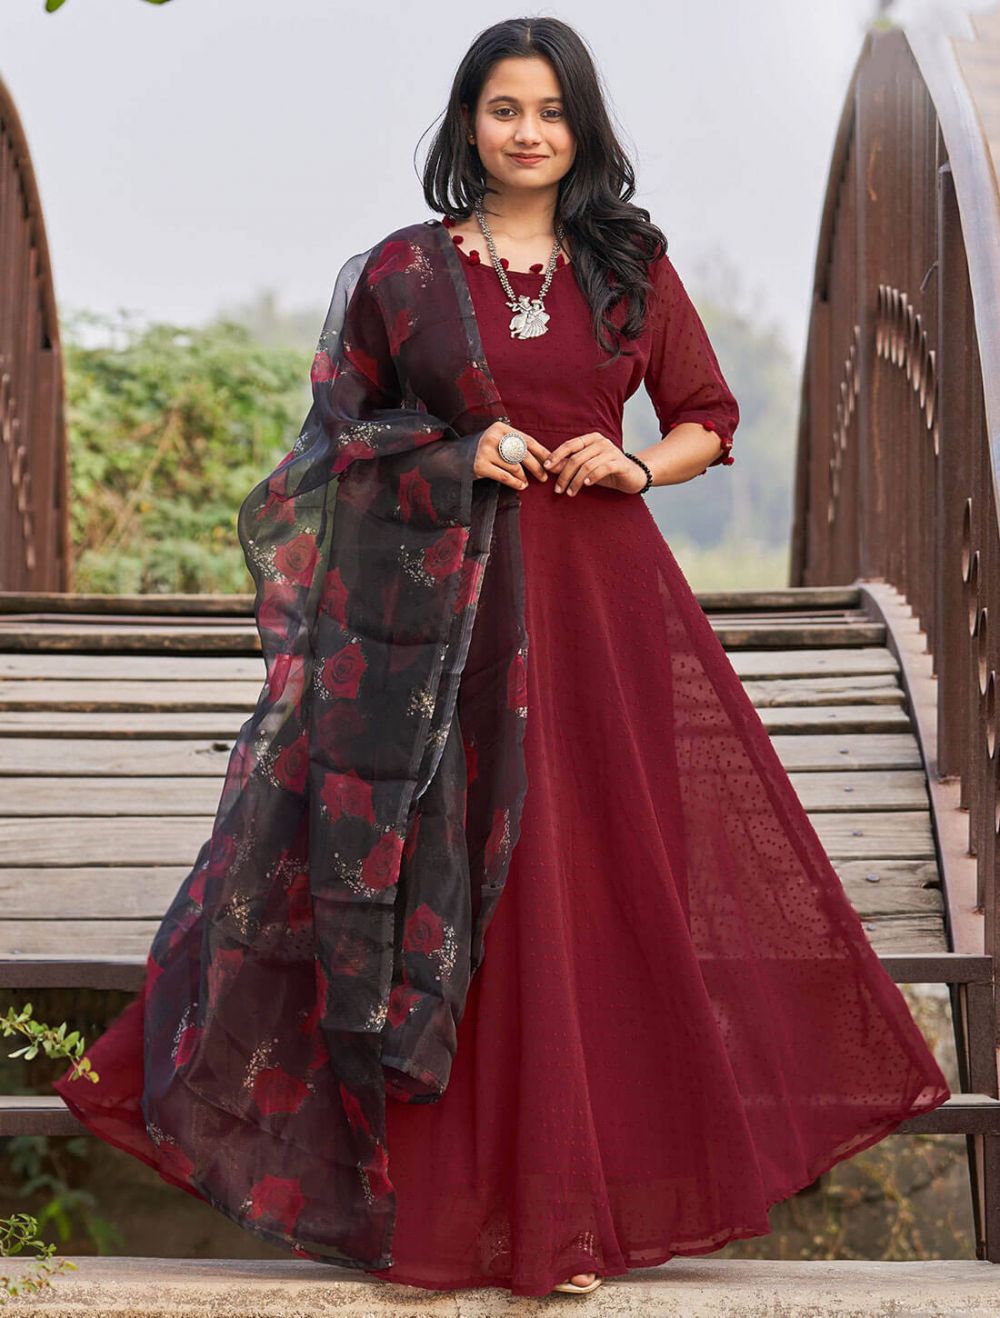 Buy APRATIM Cotton Women Sleep Wear/Night Gown Casual Maroon Color Size  Free Size at Amazon.in